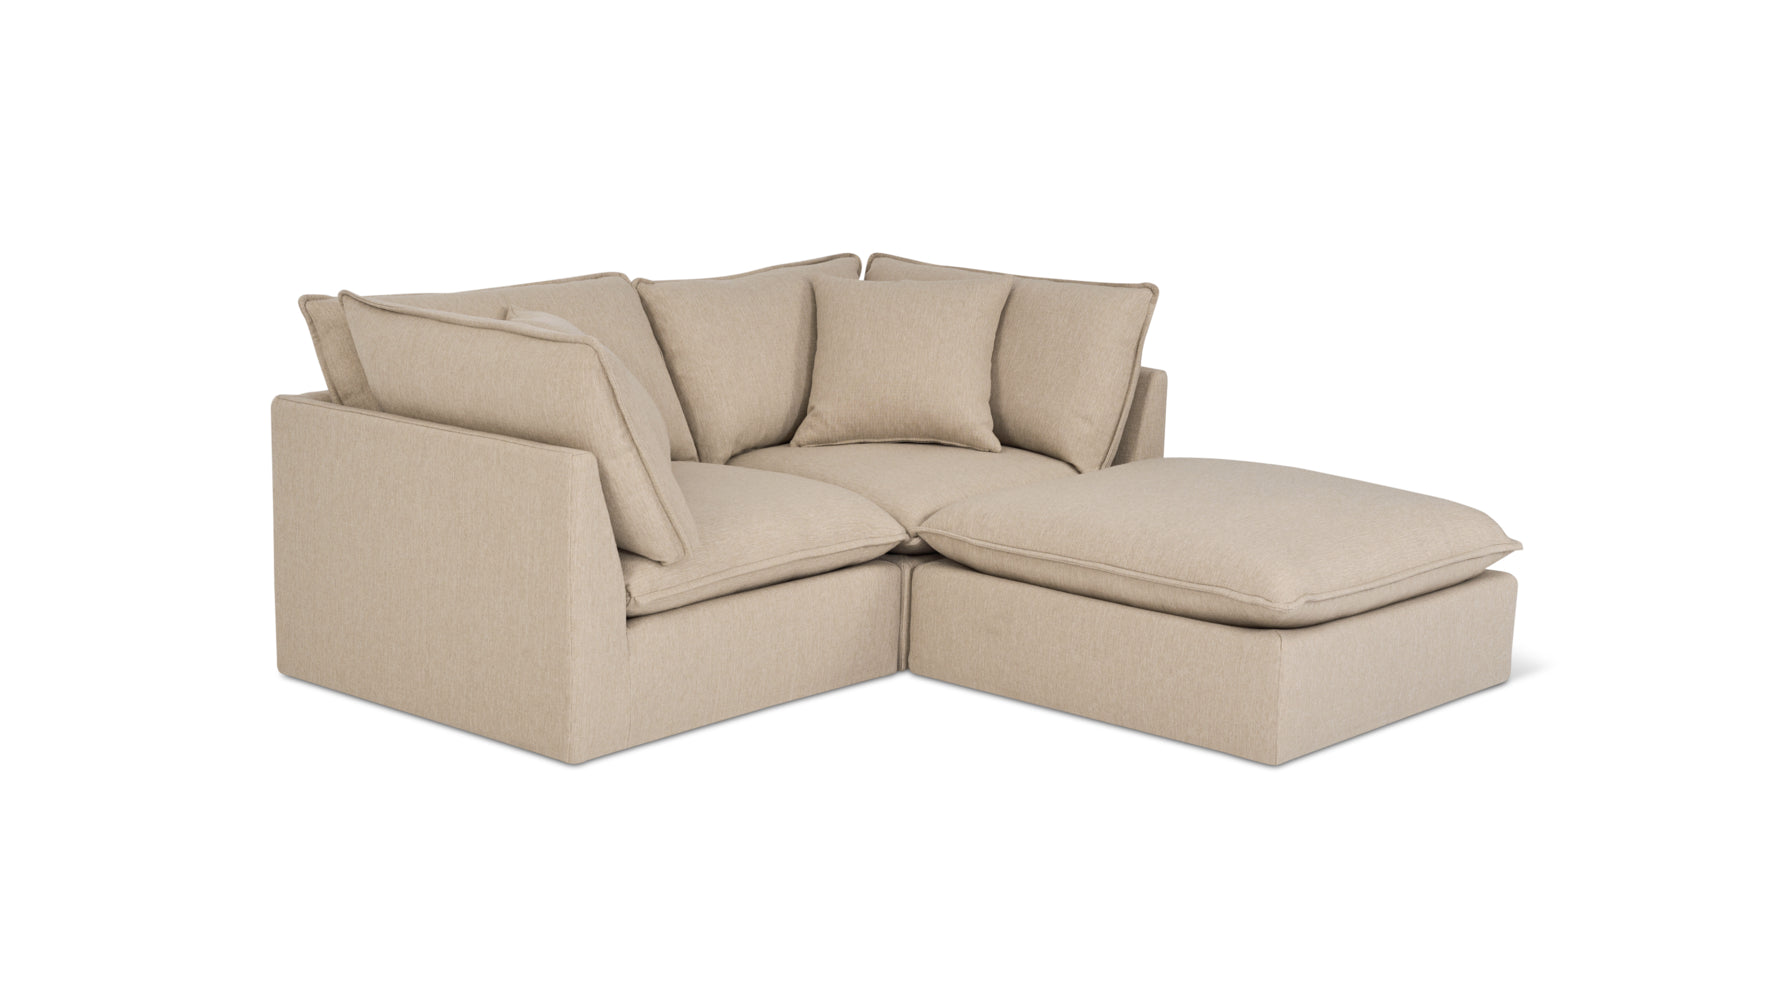 Chill Time 3-Piece Modular Sectional, Biscuit - Image 2